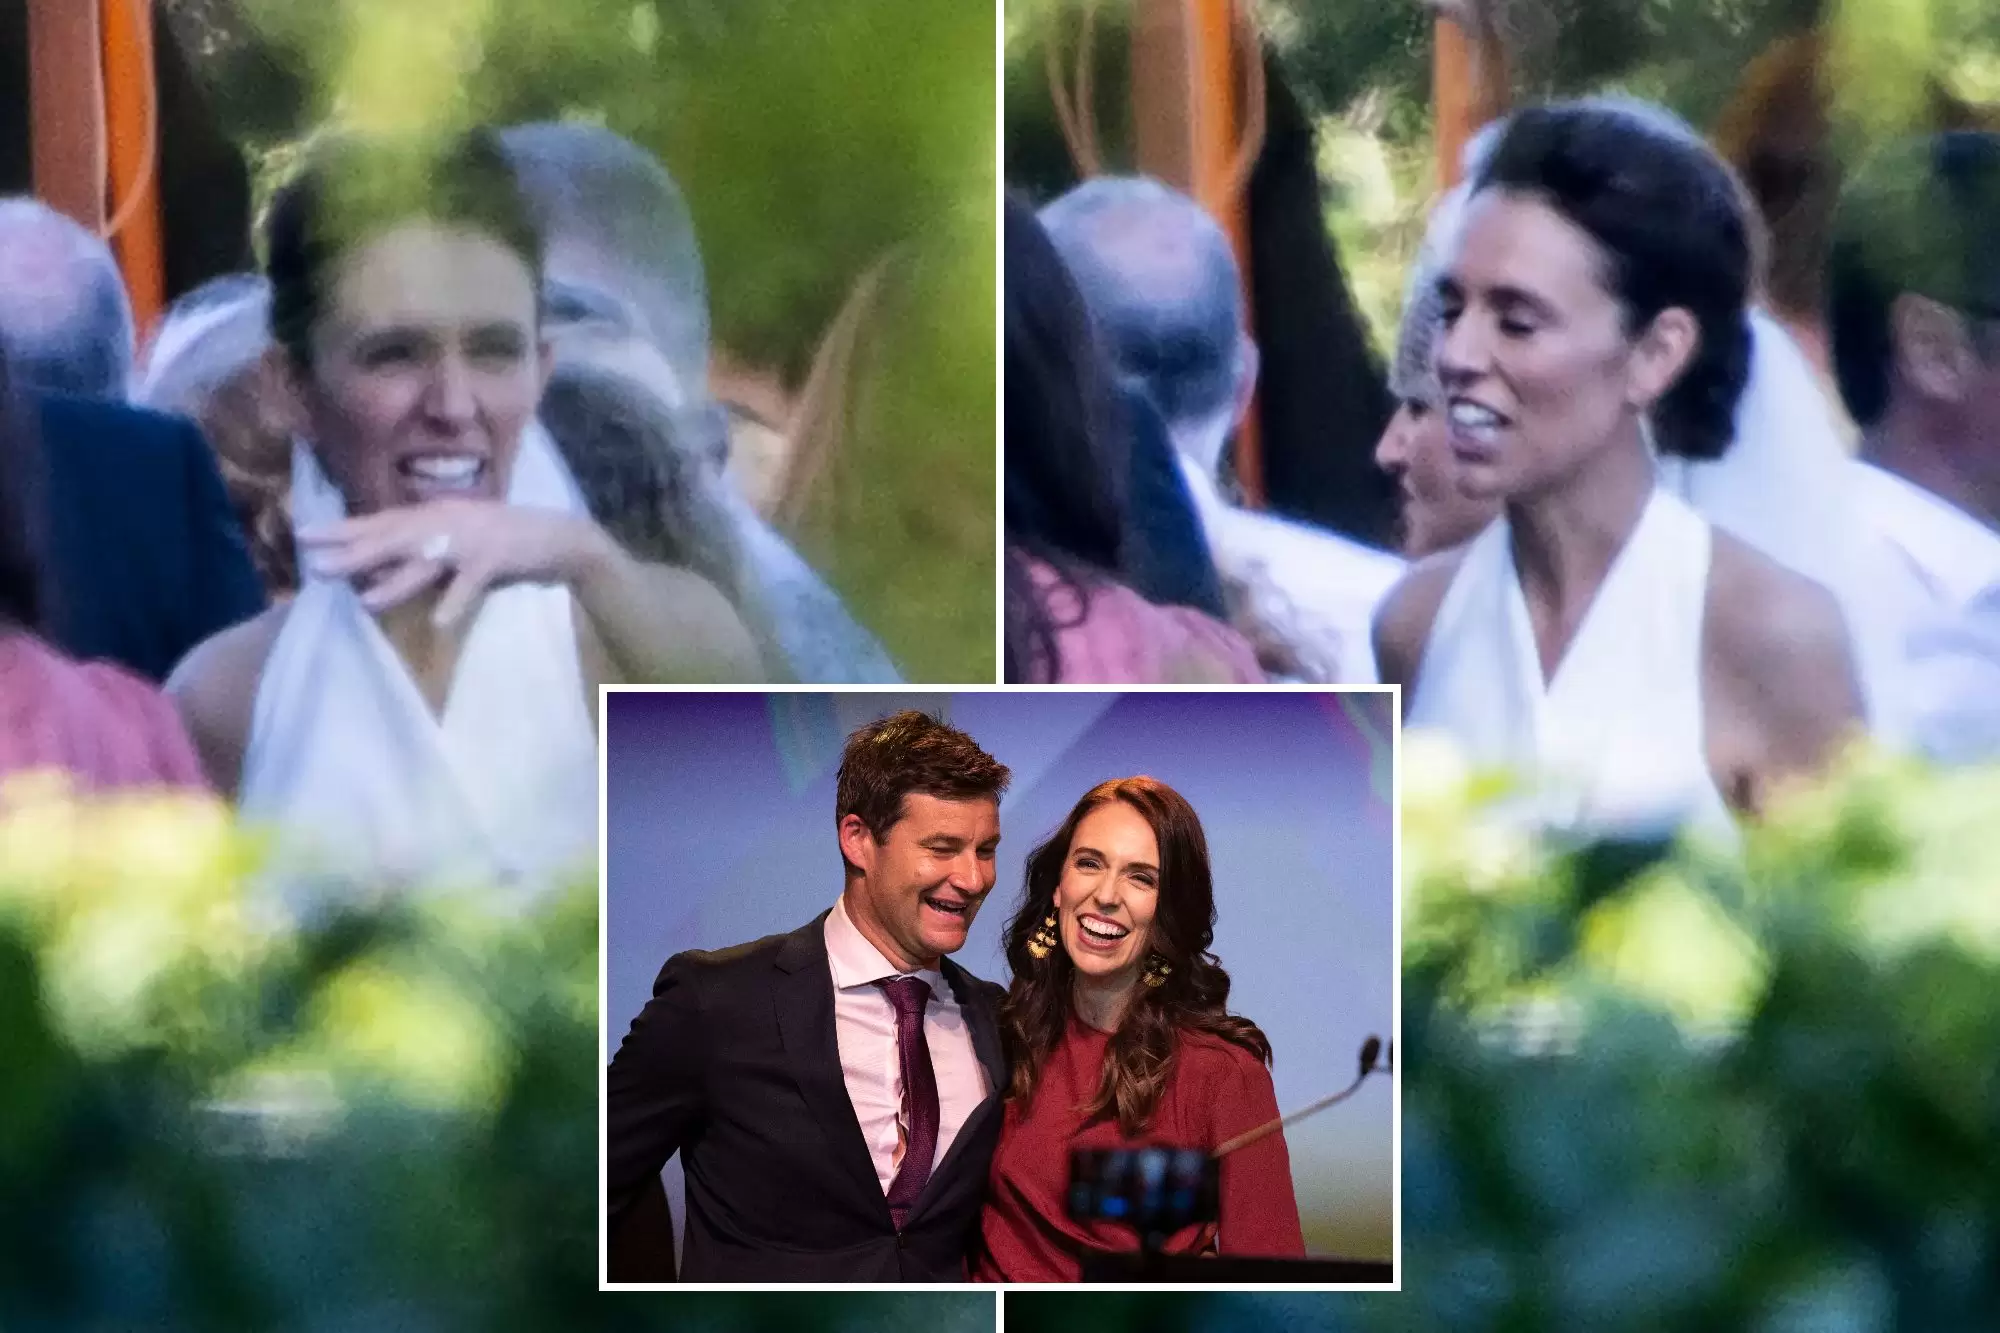 Former New Zealand PM Jacinda Ardern marries longtime fiancé as anti vax protesters picket outside event